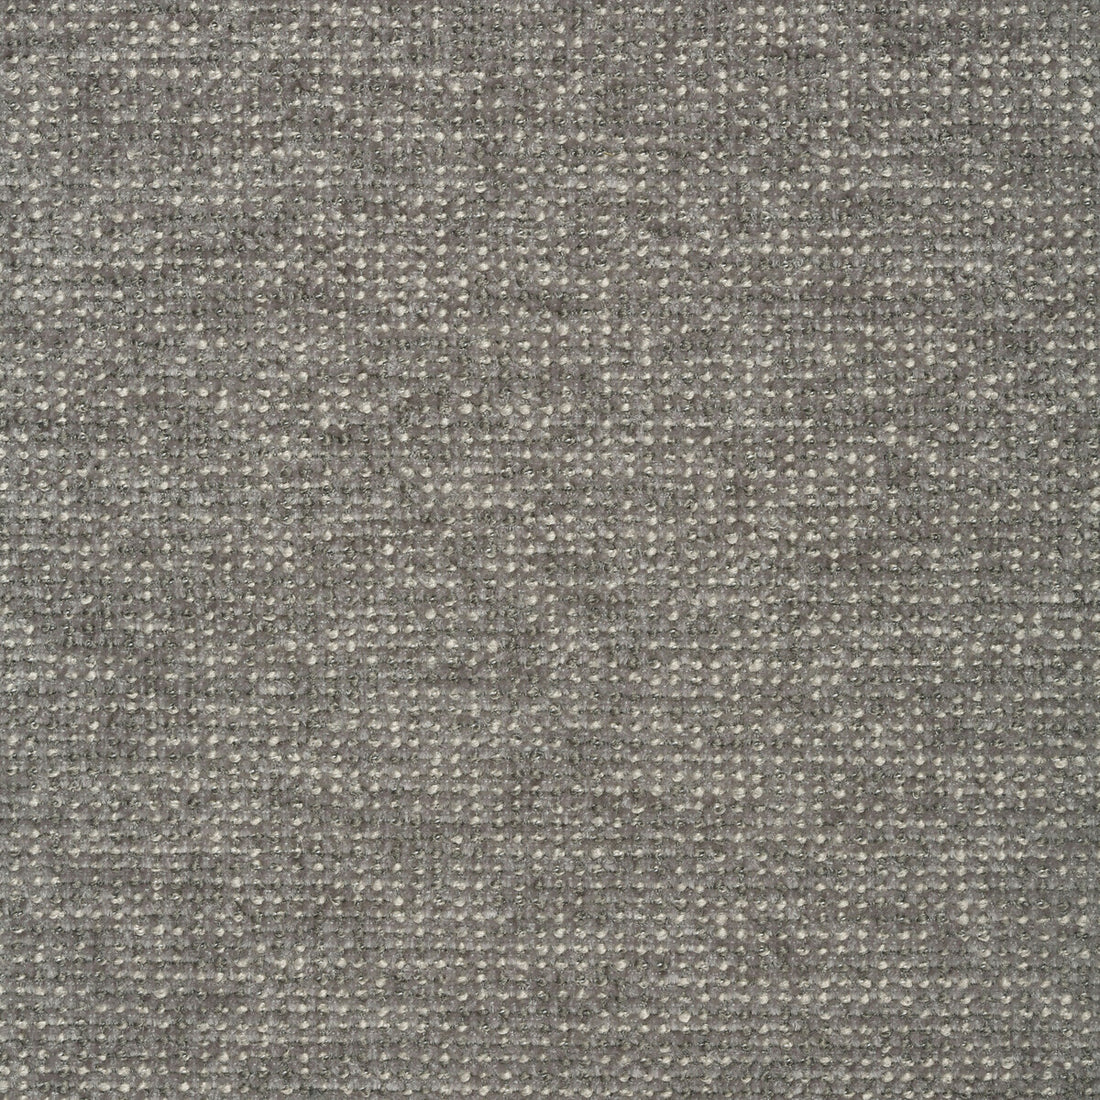 Kravet Contract fabric in 35116-11 color - pattern 35116.11.0 - by Kravet Contract in the Crypton Incase collection